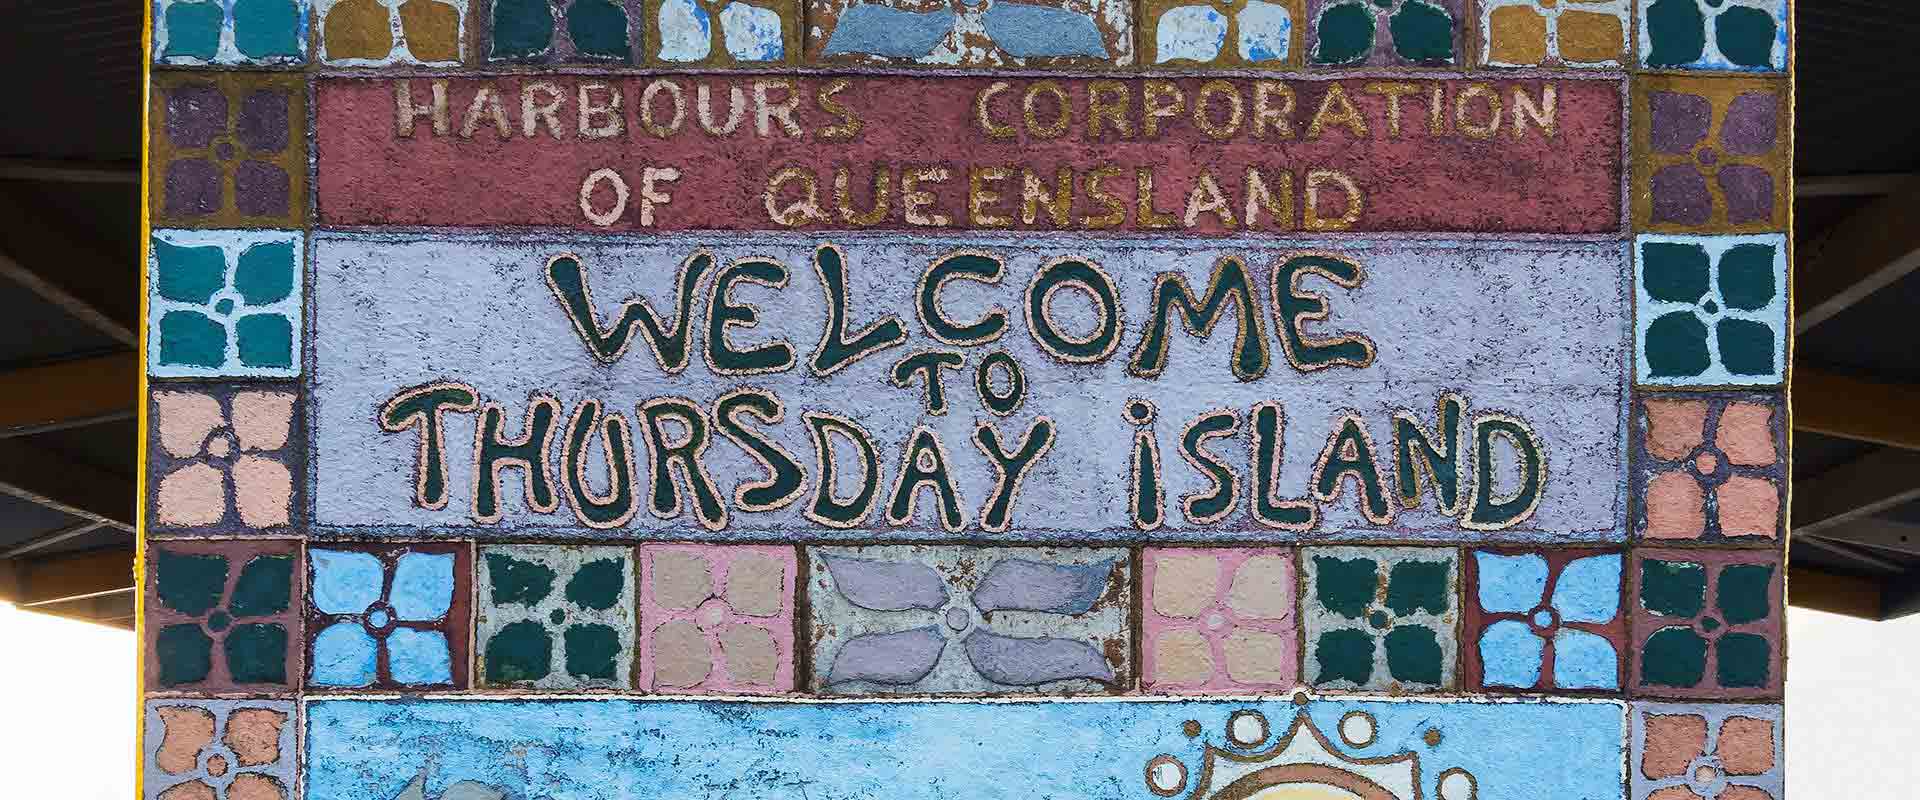 View a Welcome To Thursday Island message from the Harbours Corporation of Queensland